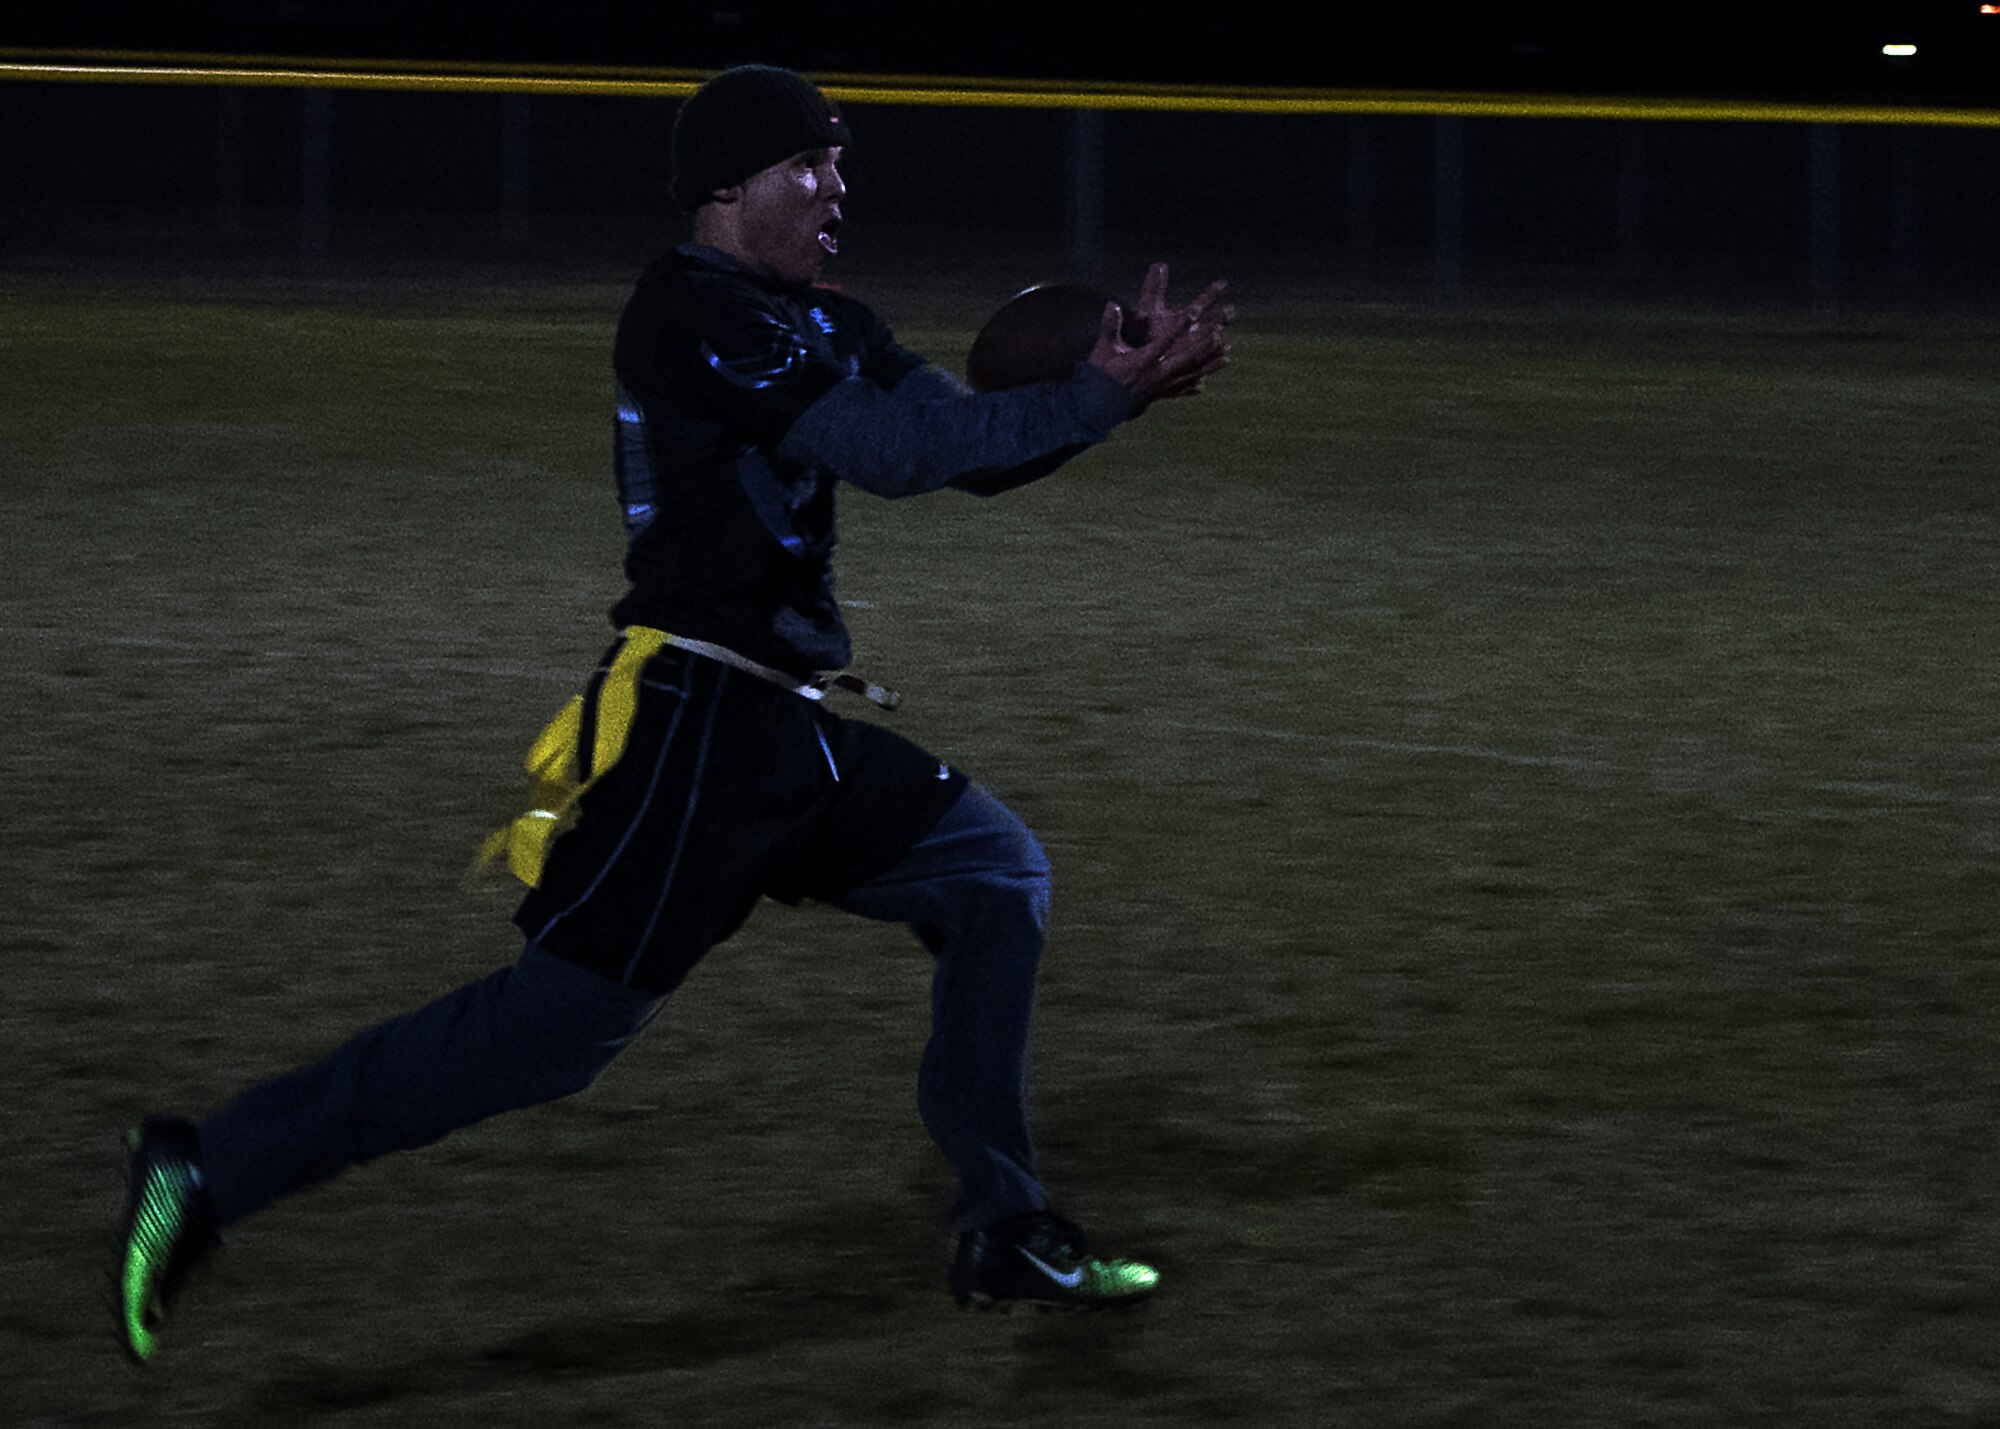 Tyler Kim, 790th Missile Security Forces Squadron Tactical Response Force intramural flag football team member, catches a pass during the championship game on F.E. Warren Air Force Base, Wyo., Oct. 19, 2016. The TRF team won two games before losing in the final match 14-6. (U.S. Air Force photo by Senior Airman Brandon Valle)